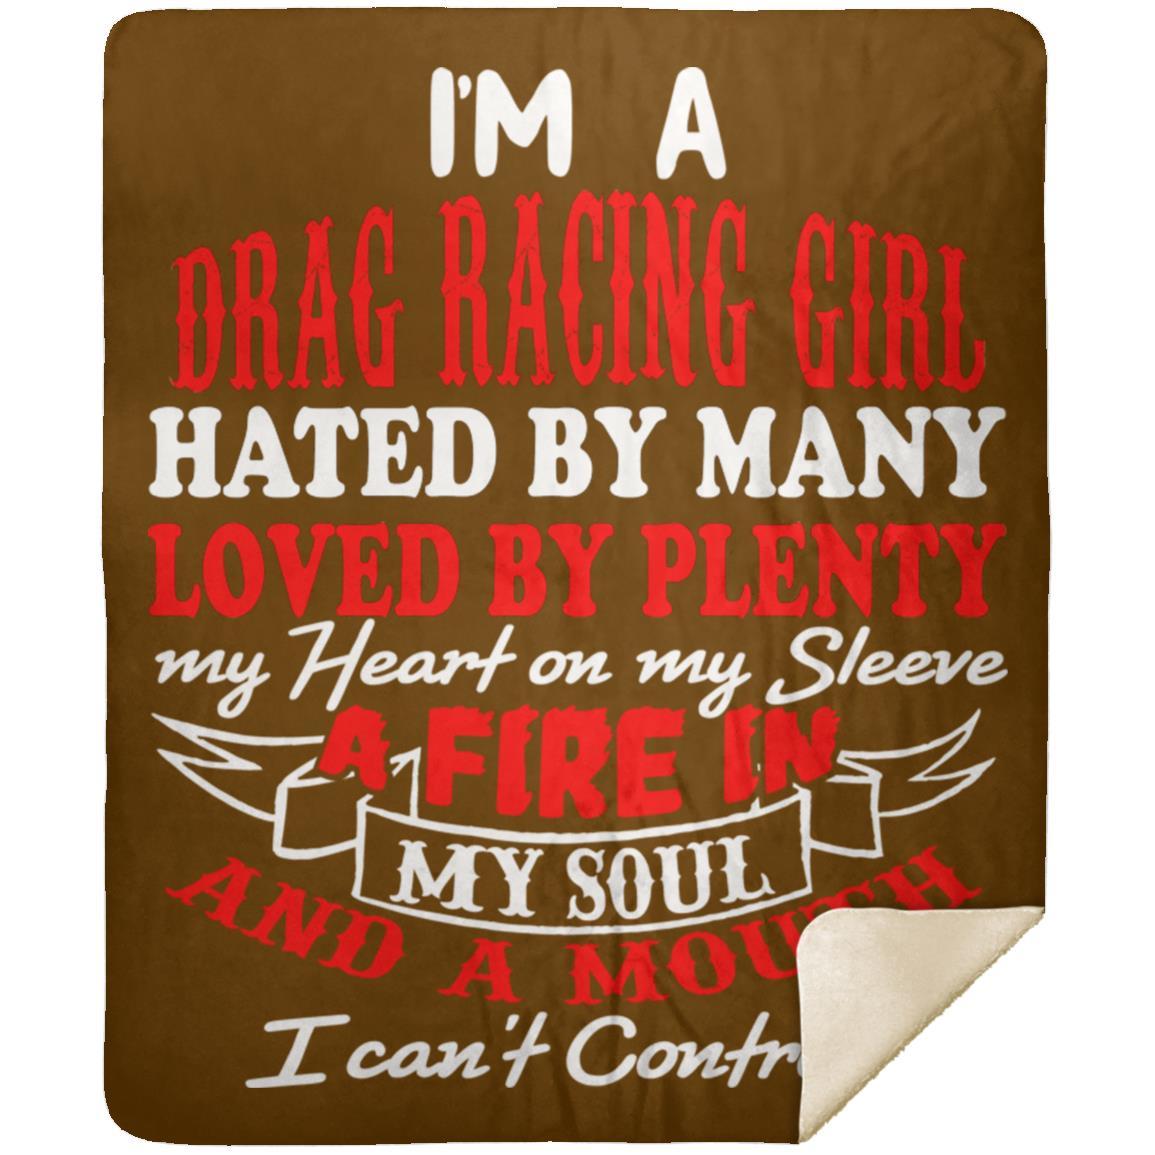 I'm A Drag Racing Girl Hated By Many Loved By Plenty Premium Mink Sherpa Blanket 50x60